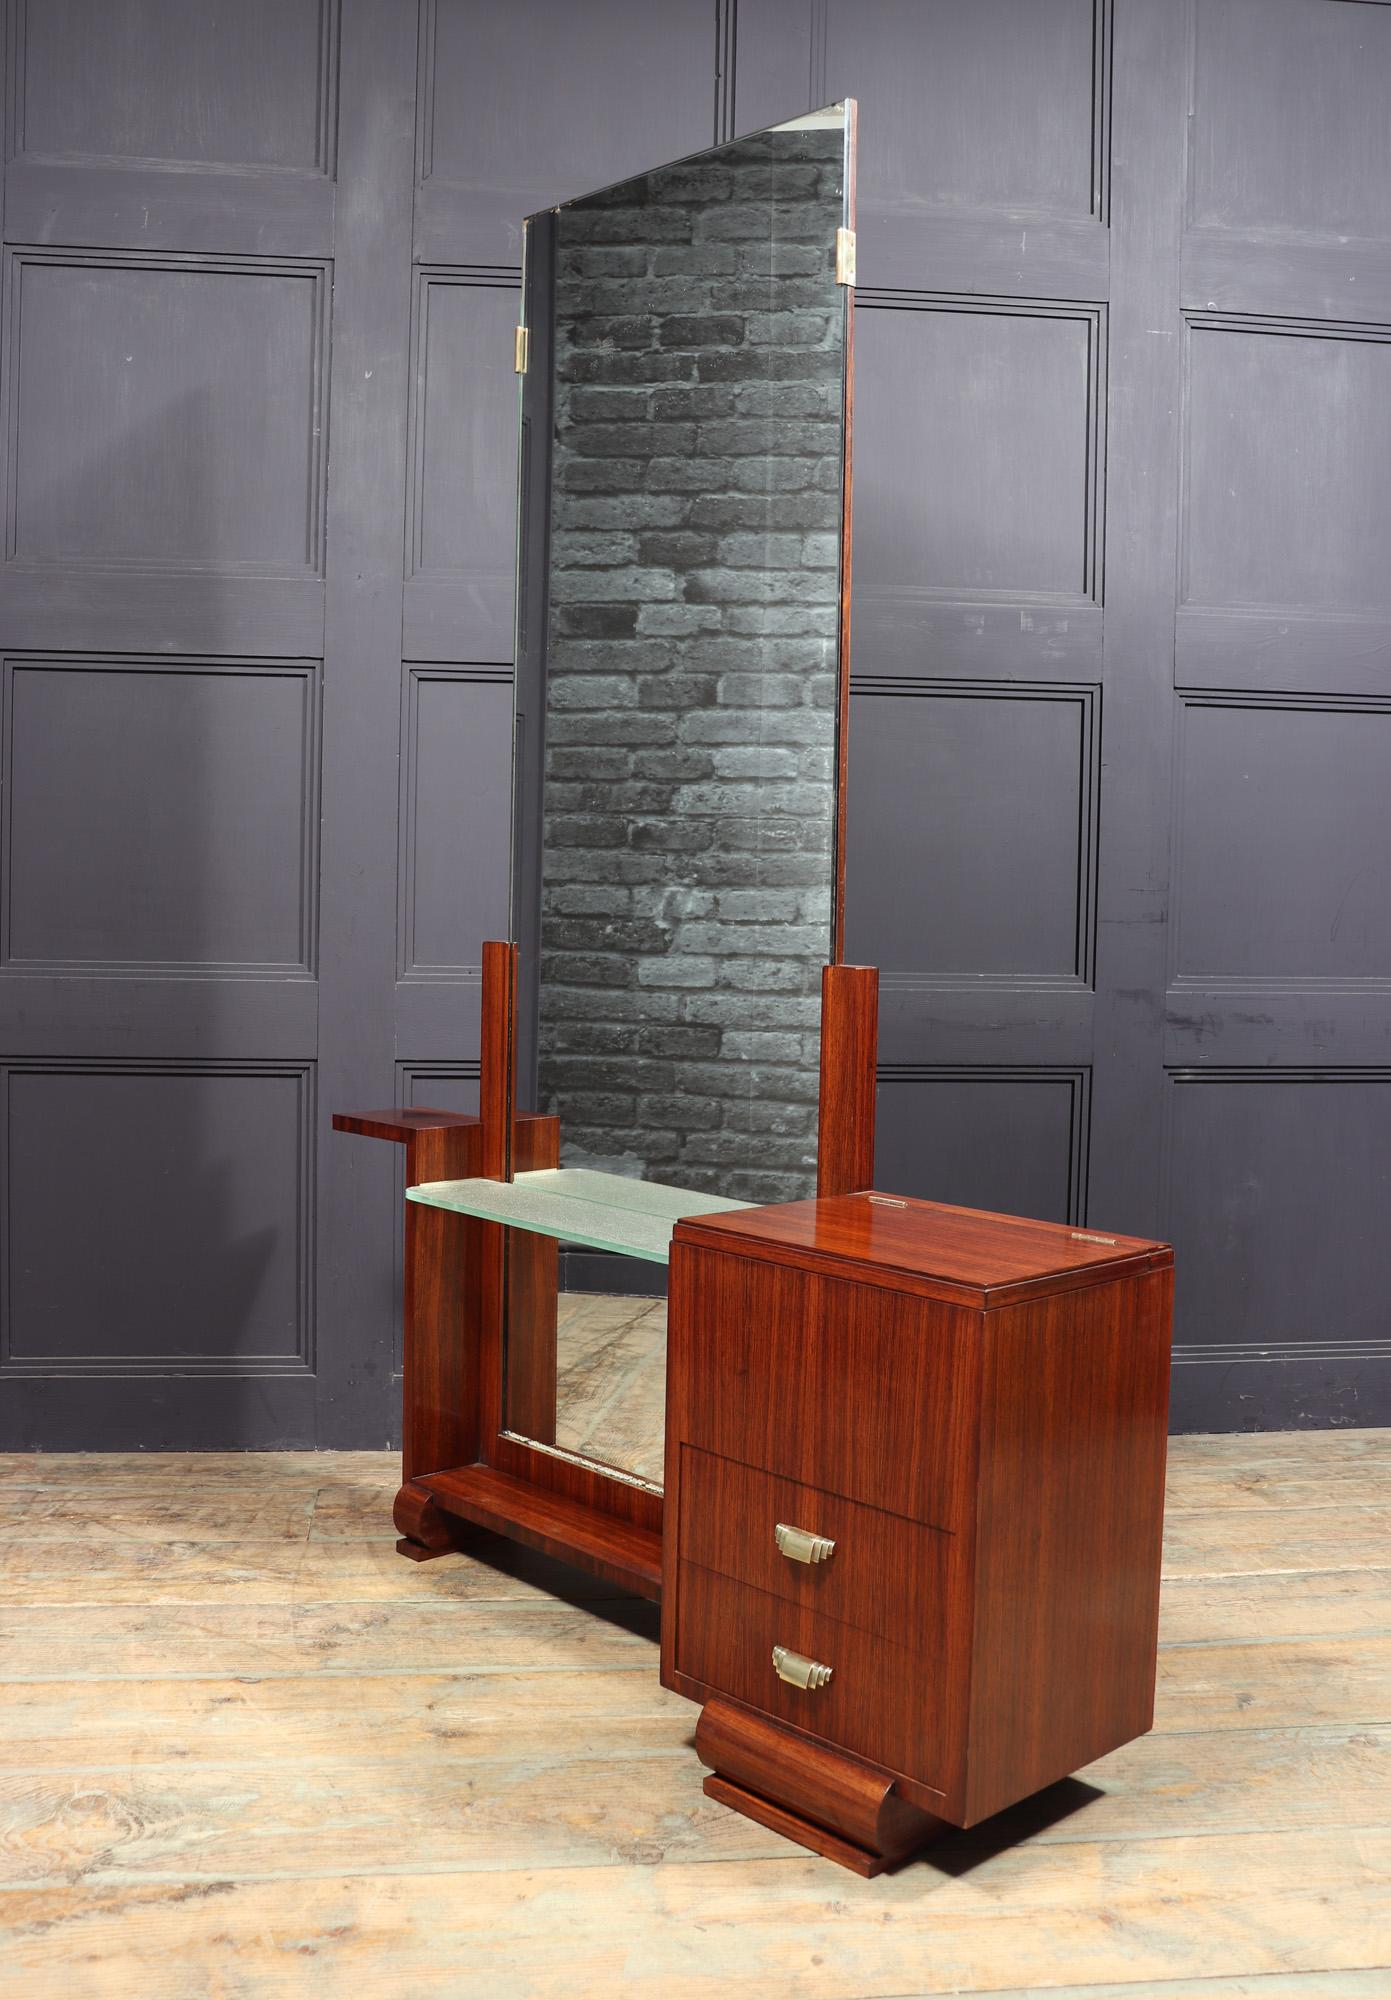 FRENCH ART DECO DRESSING TABLE C1930
A French-made Art Deco dressing table from the 1930s, crafted in palisander with an asymmetrical design. It features two drawers on the right side and a sycamore-lined lift-up compartment adorned with elegant